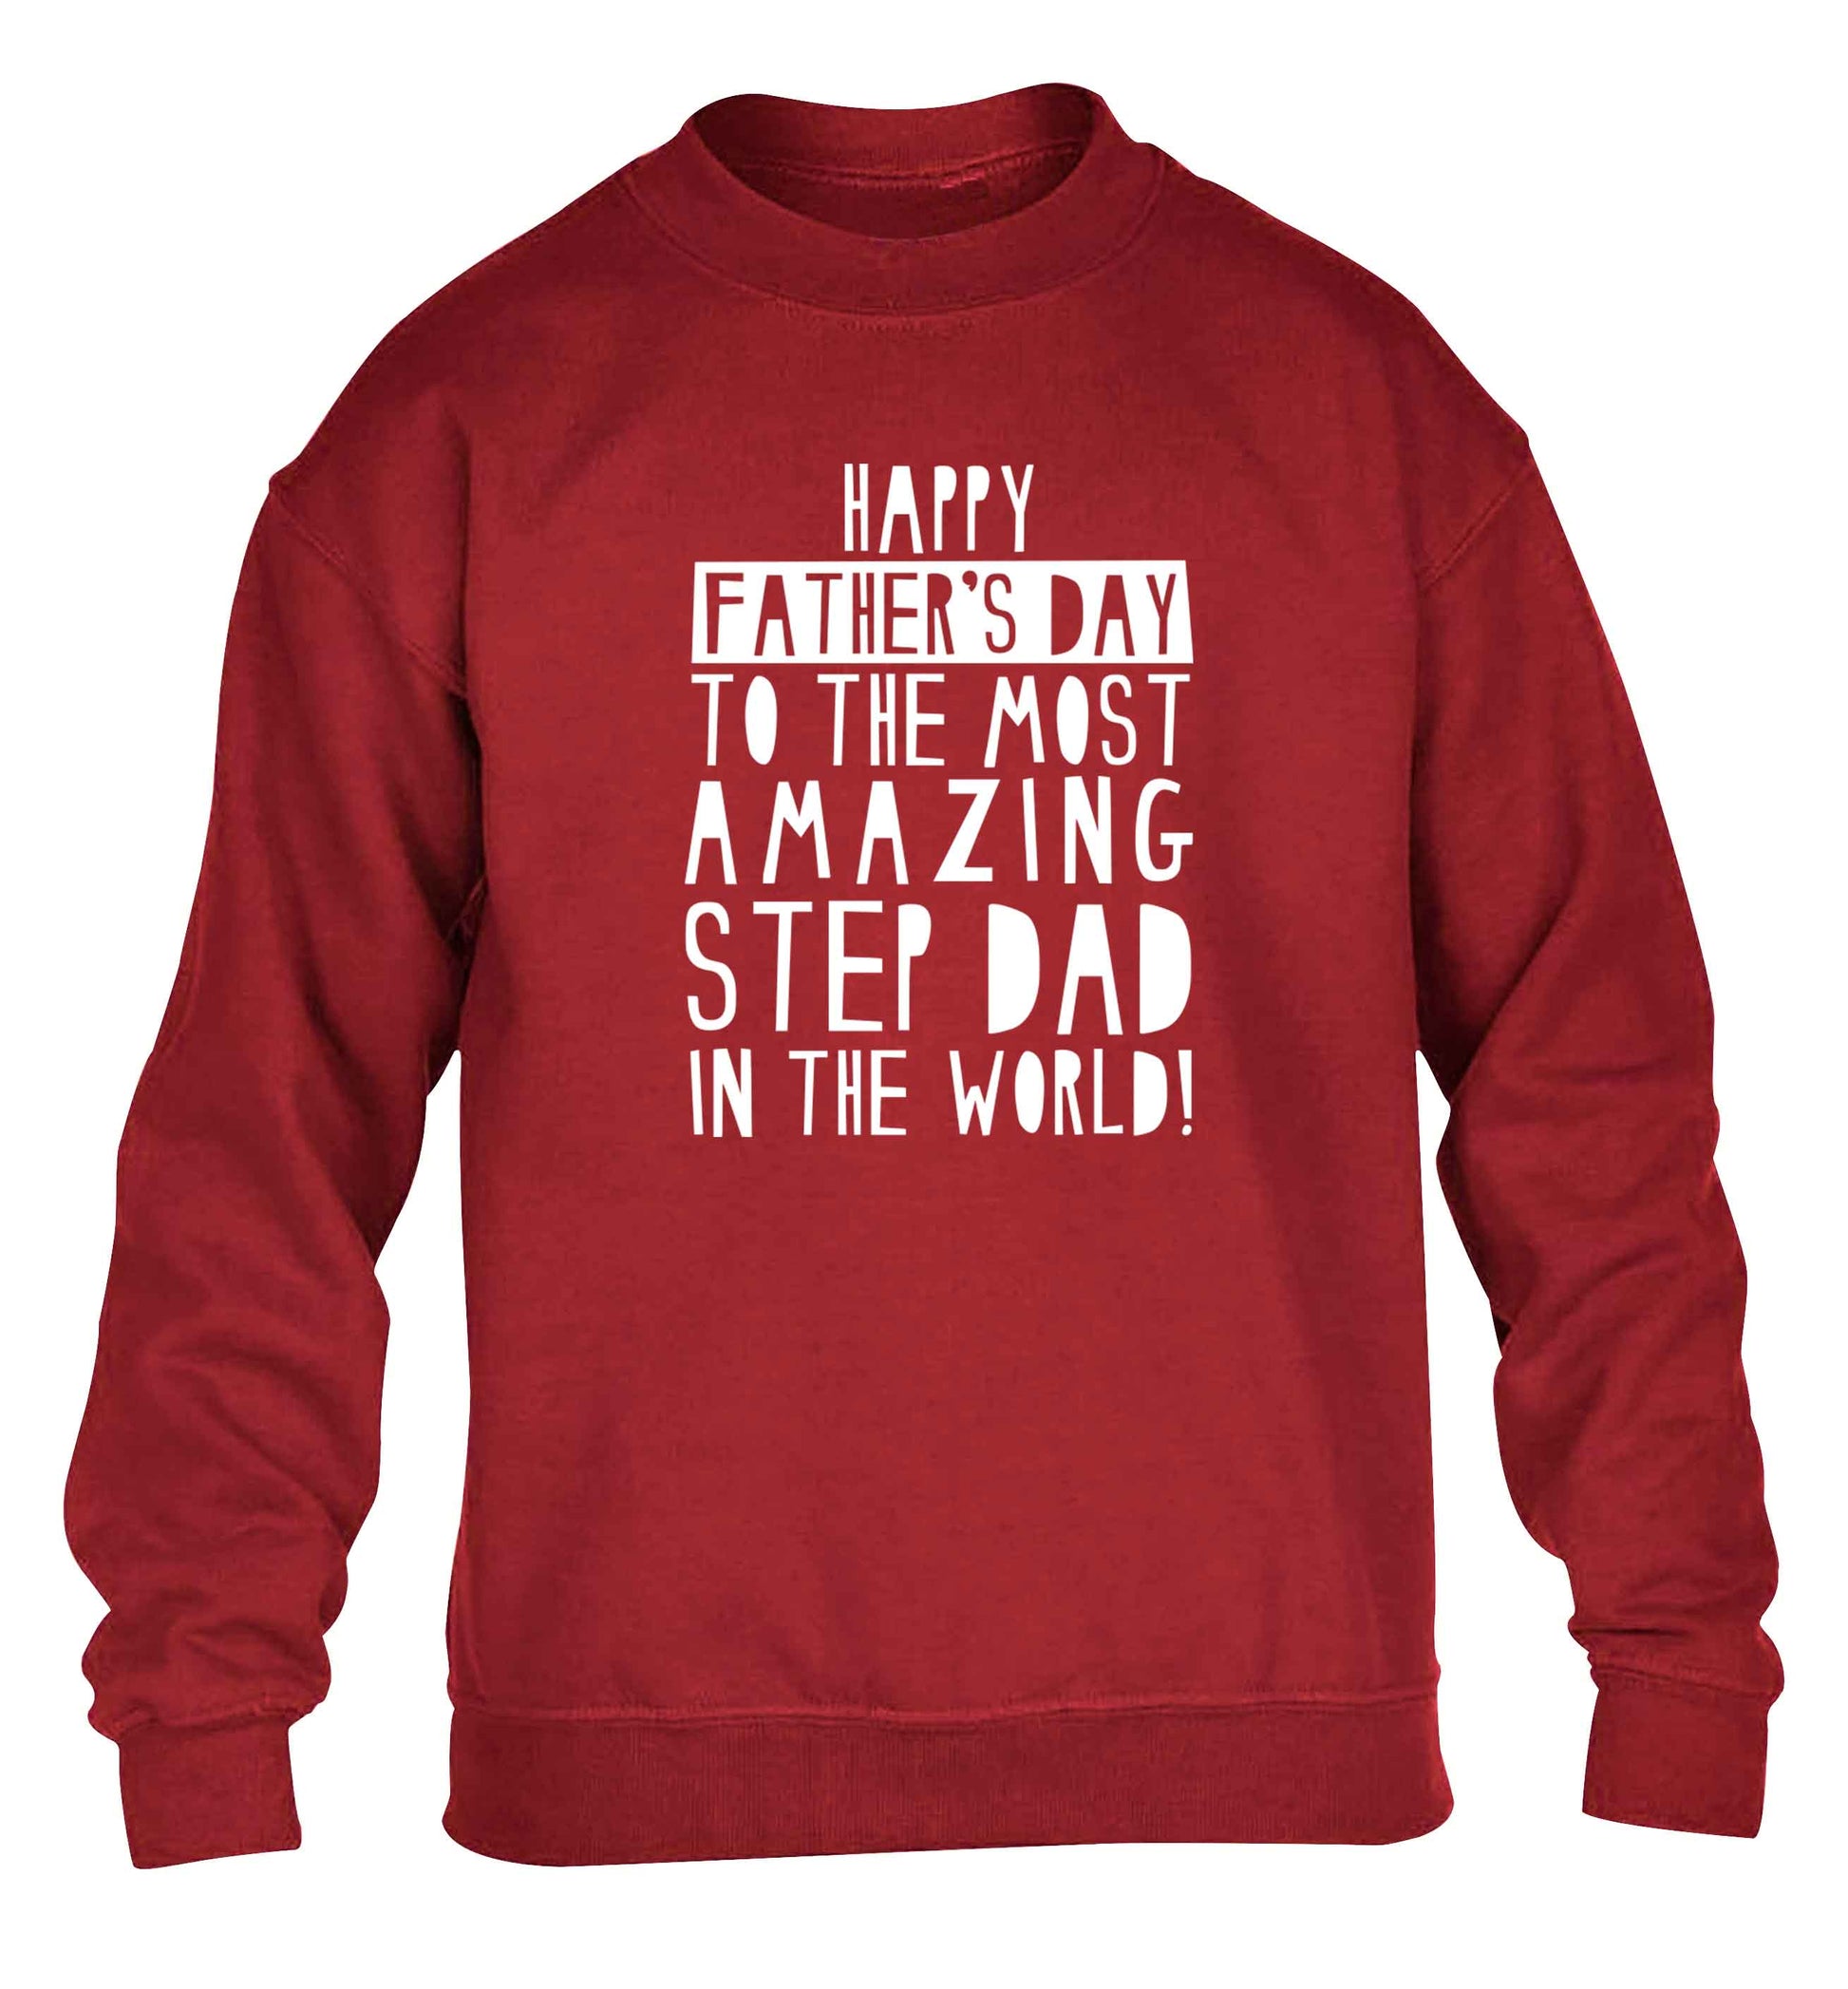 Happy Father's day to the best step dad in the world children's grey sweater 12-13 Years